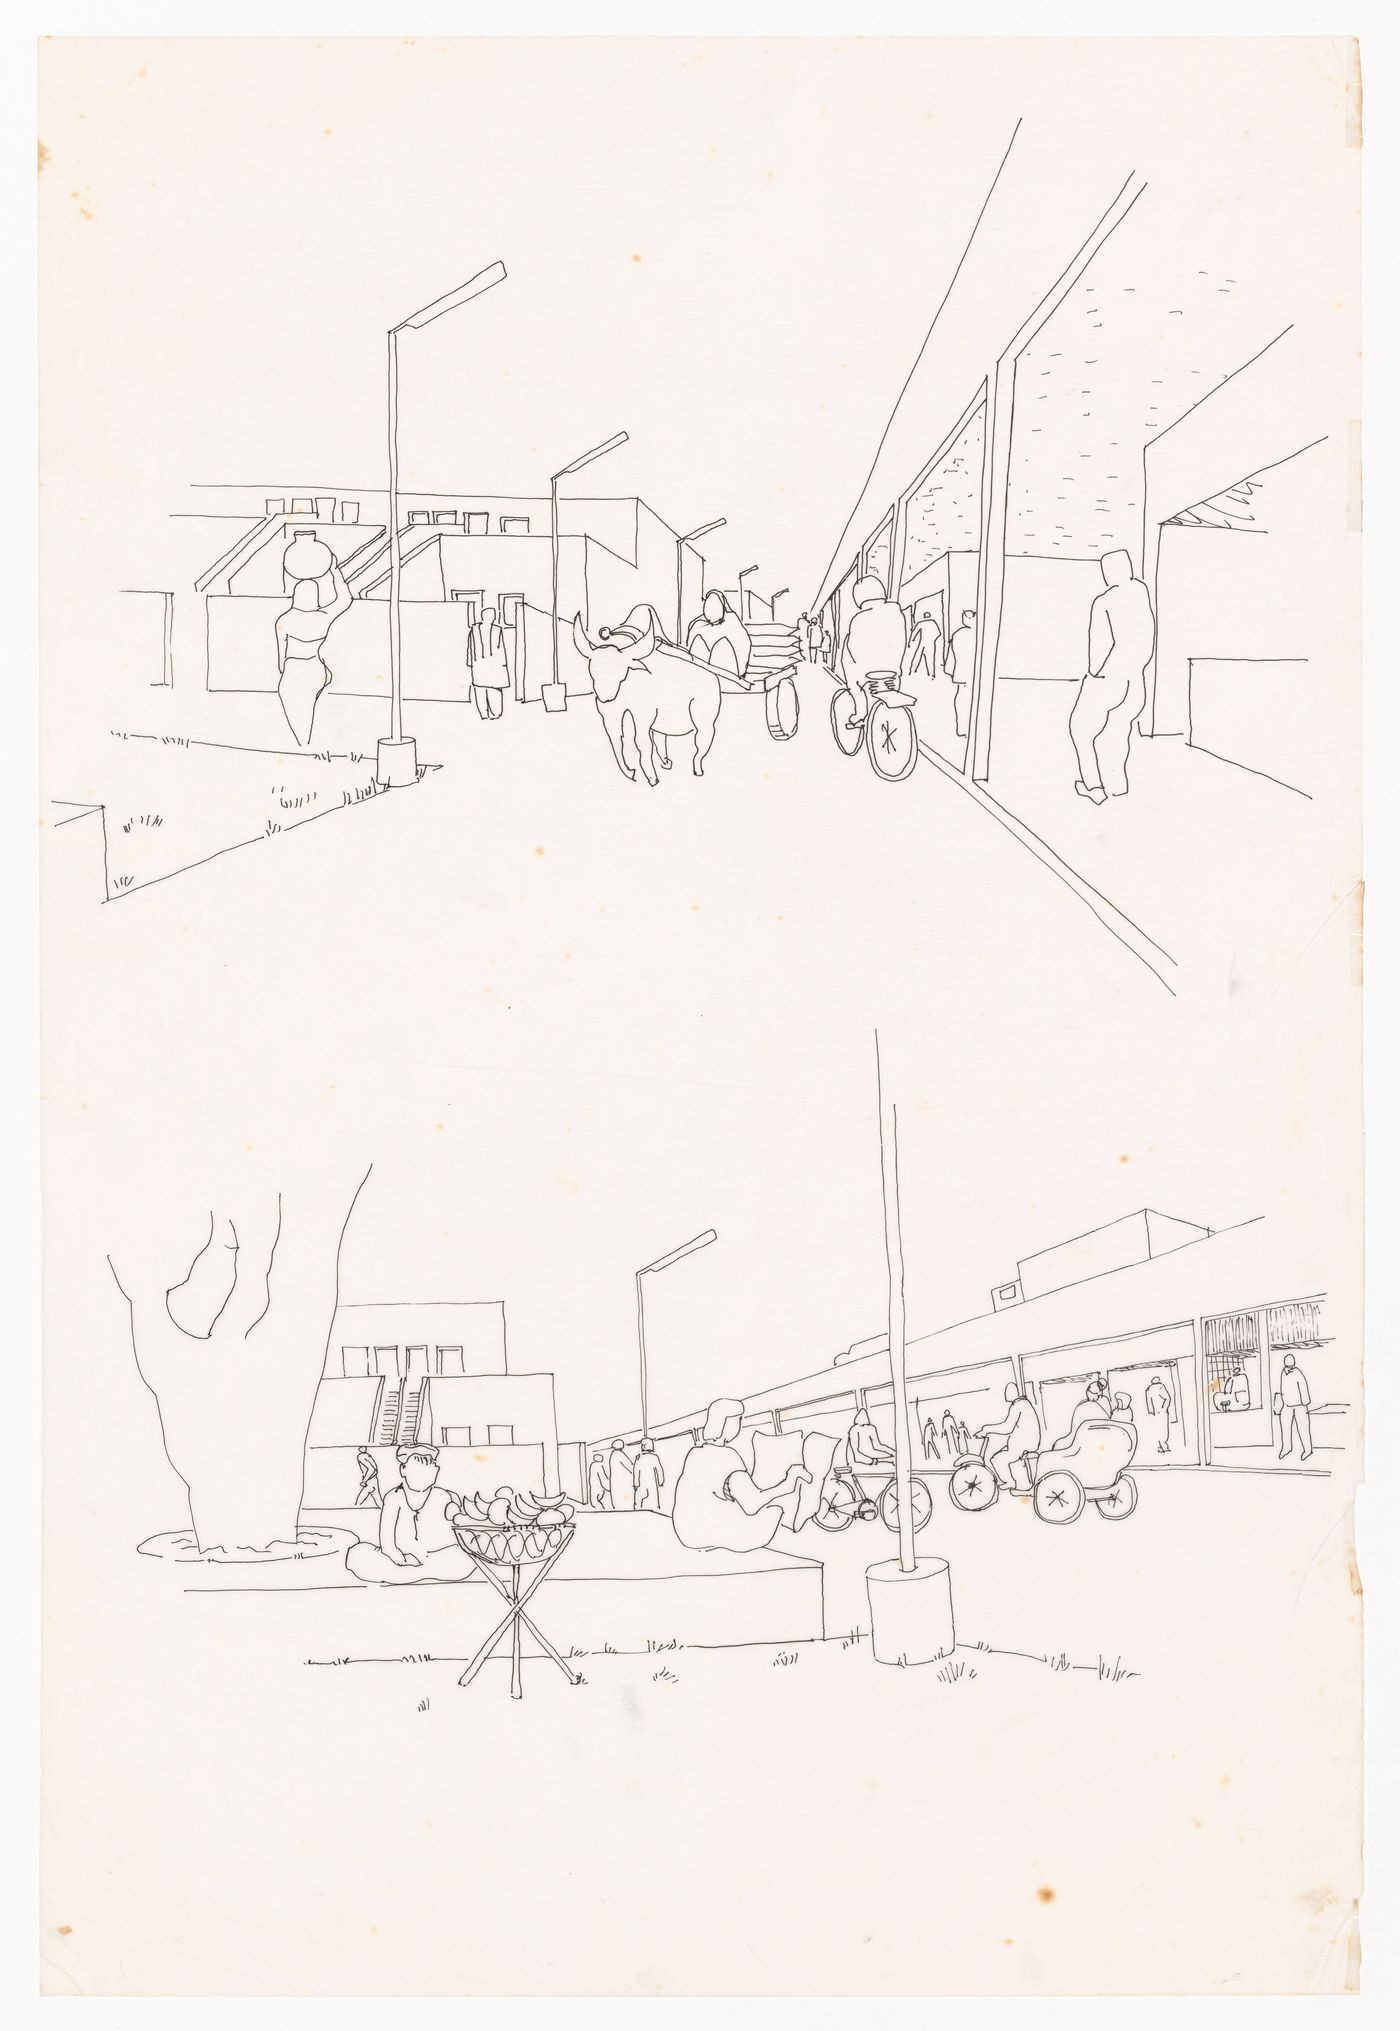 Perspective drawings of ground view for Linear city, Chandigarh, India